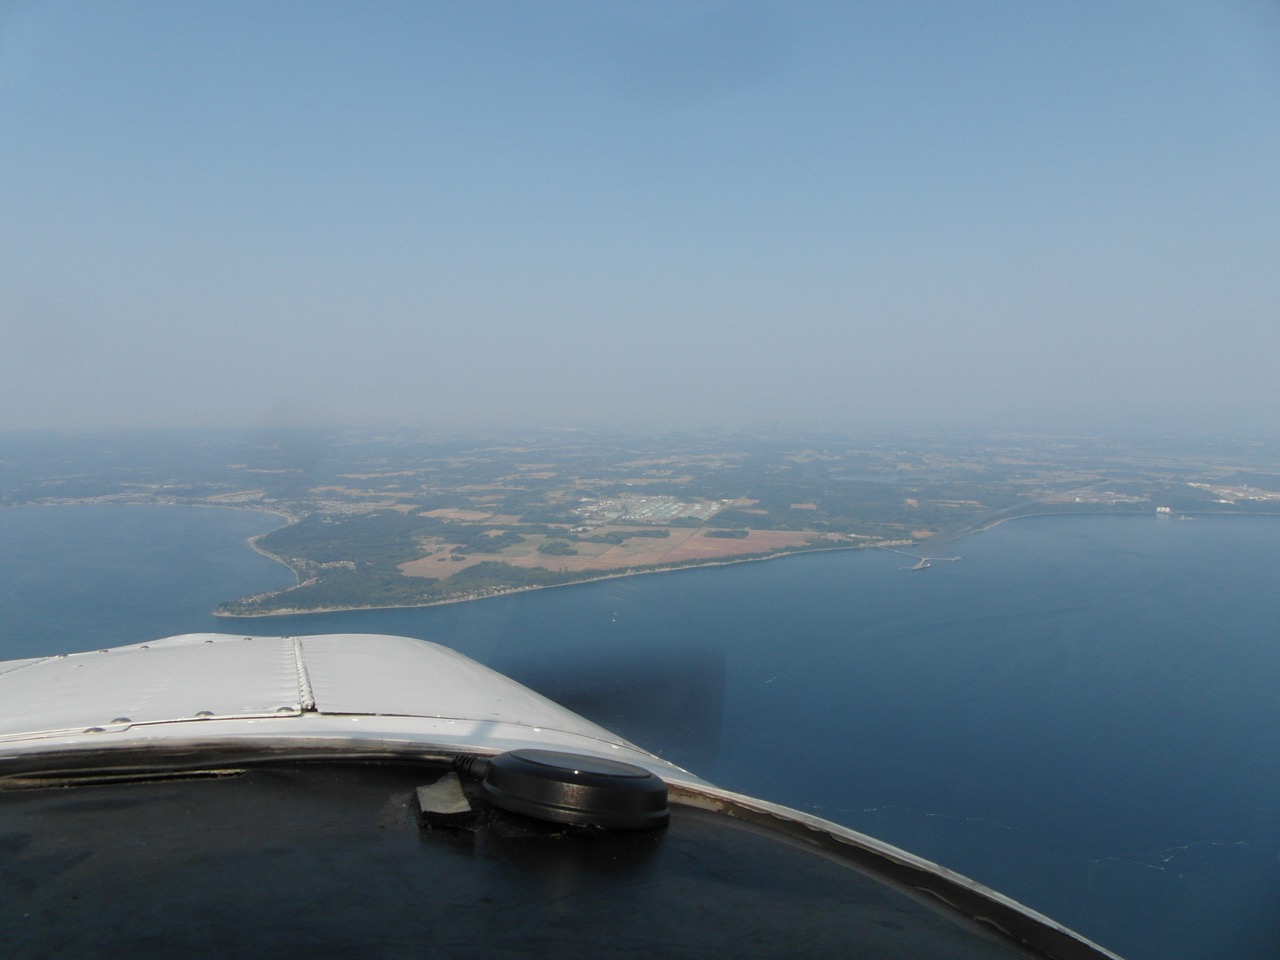 Approaching Cherry Point